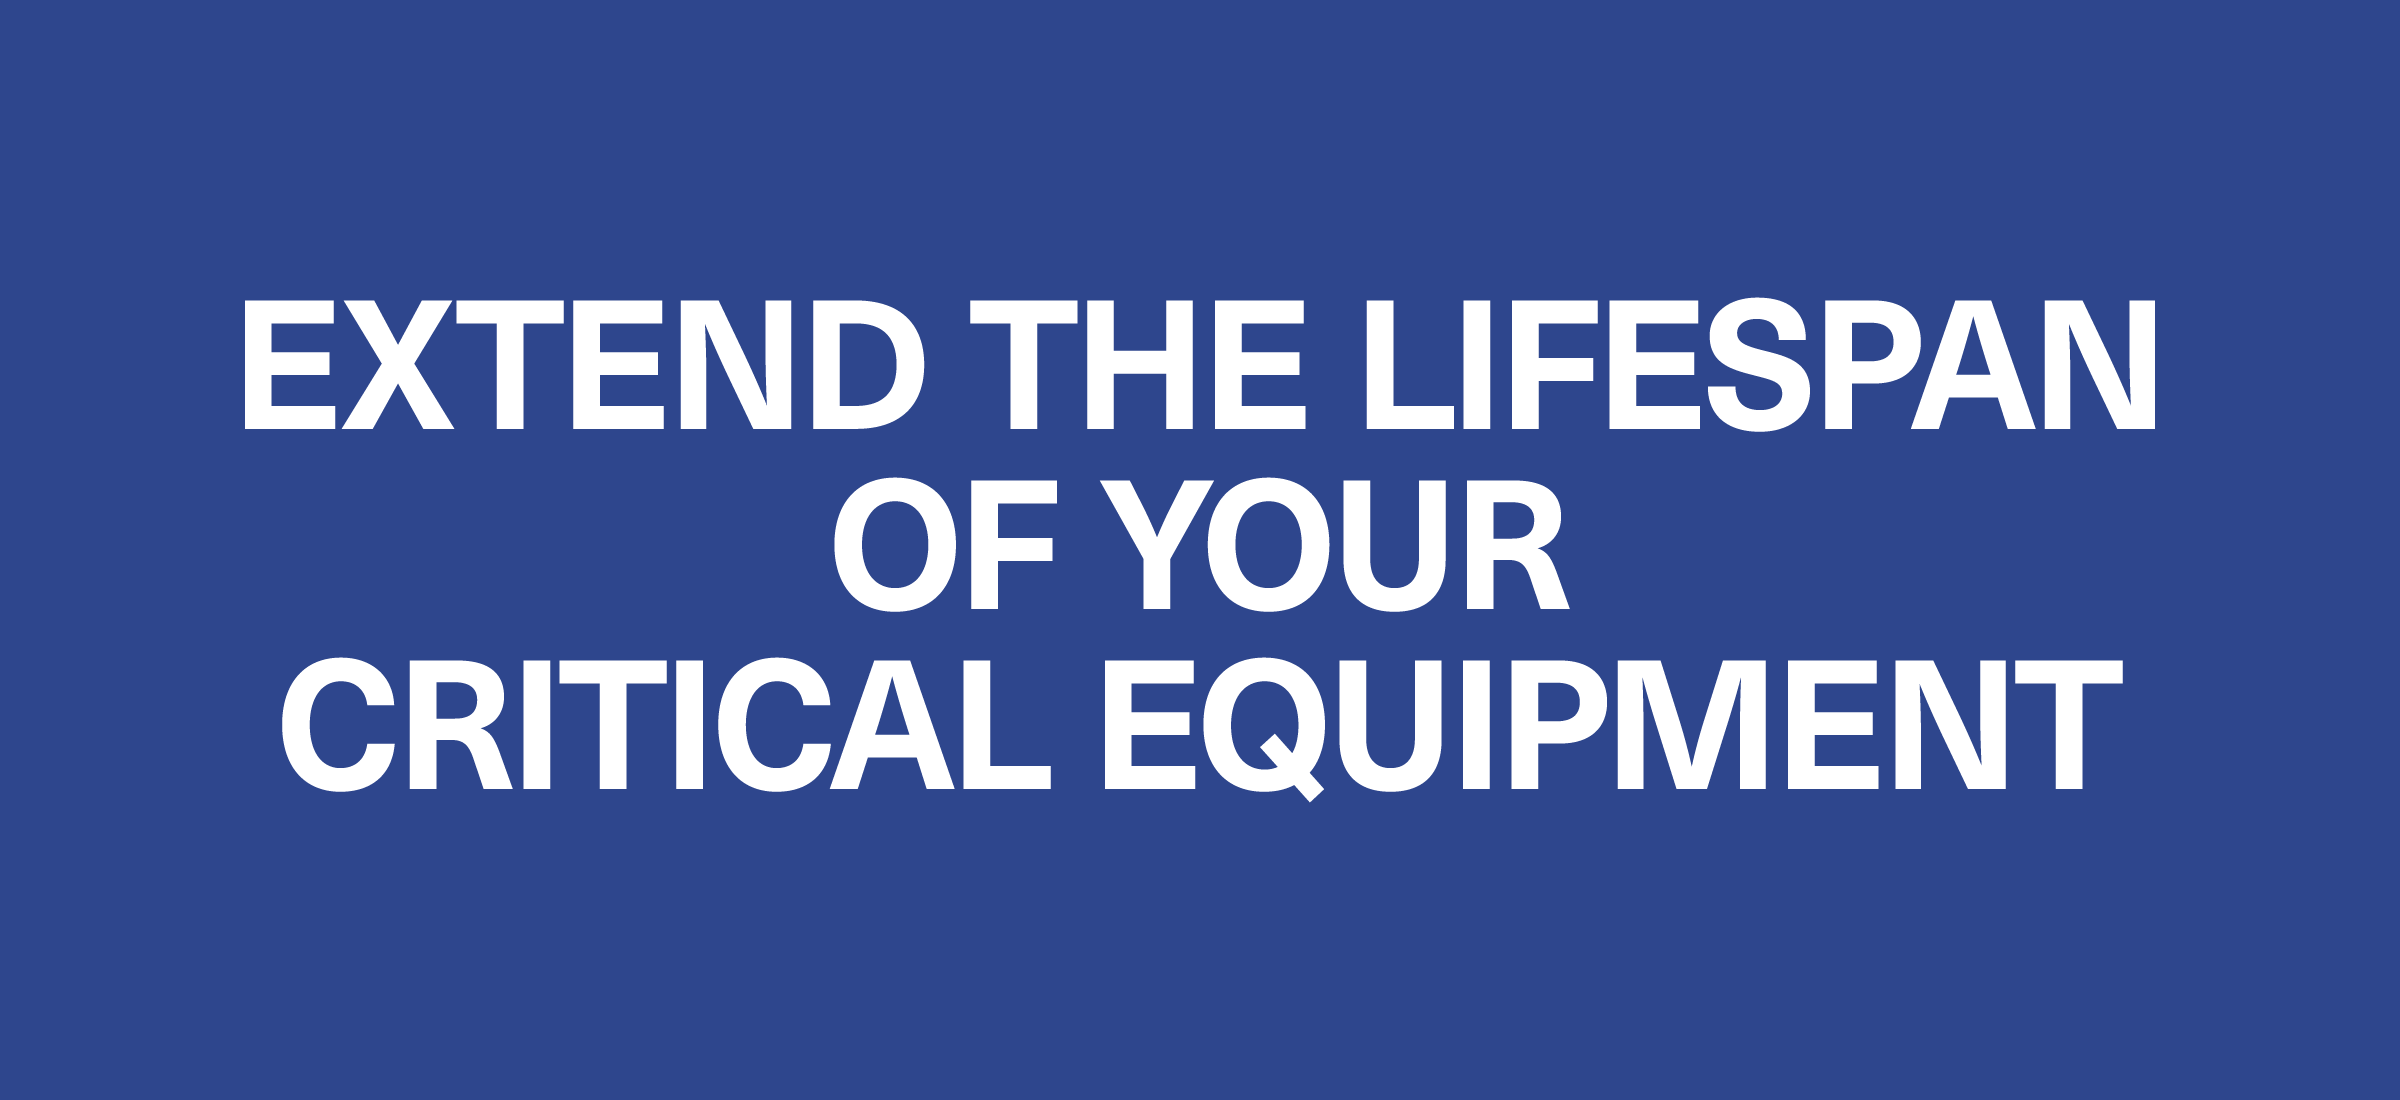 extend the lifespan of your critical equipment